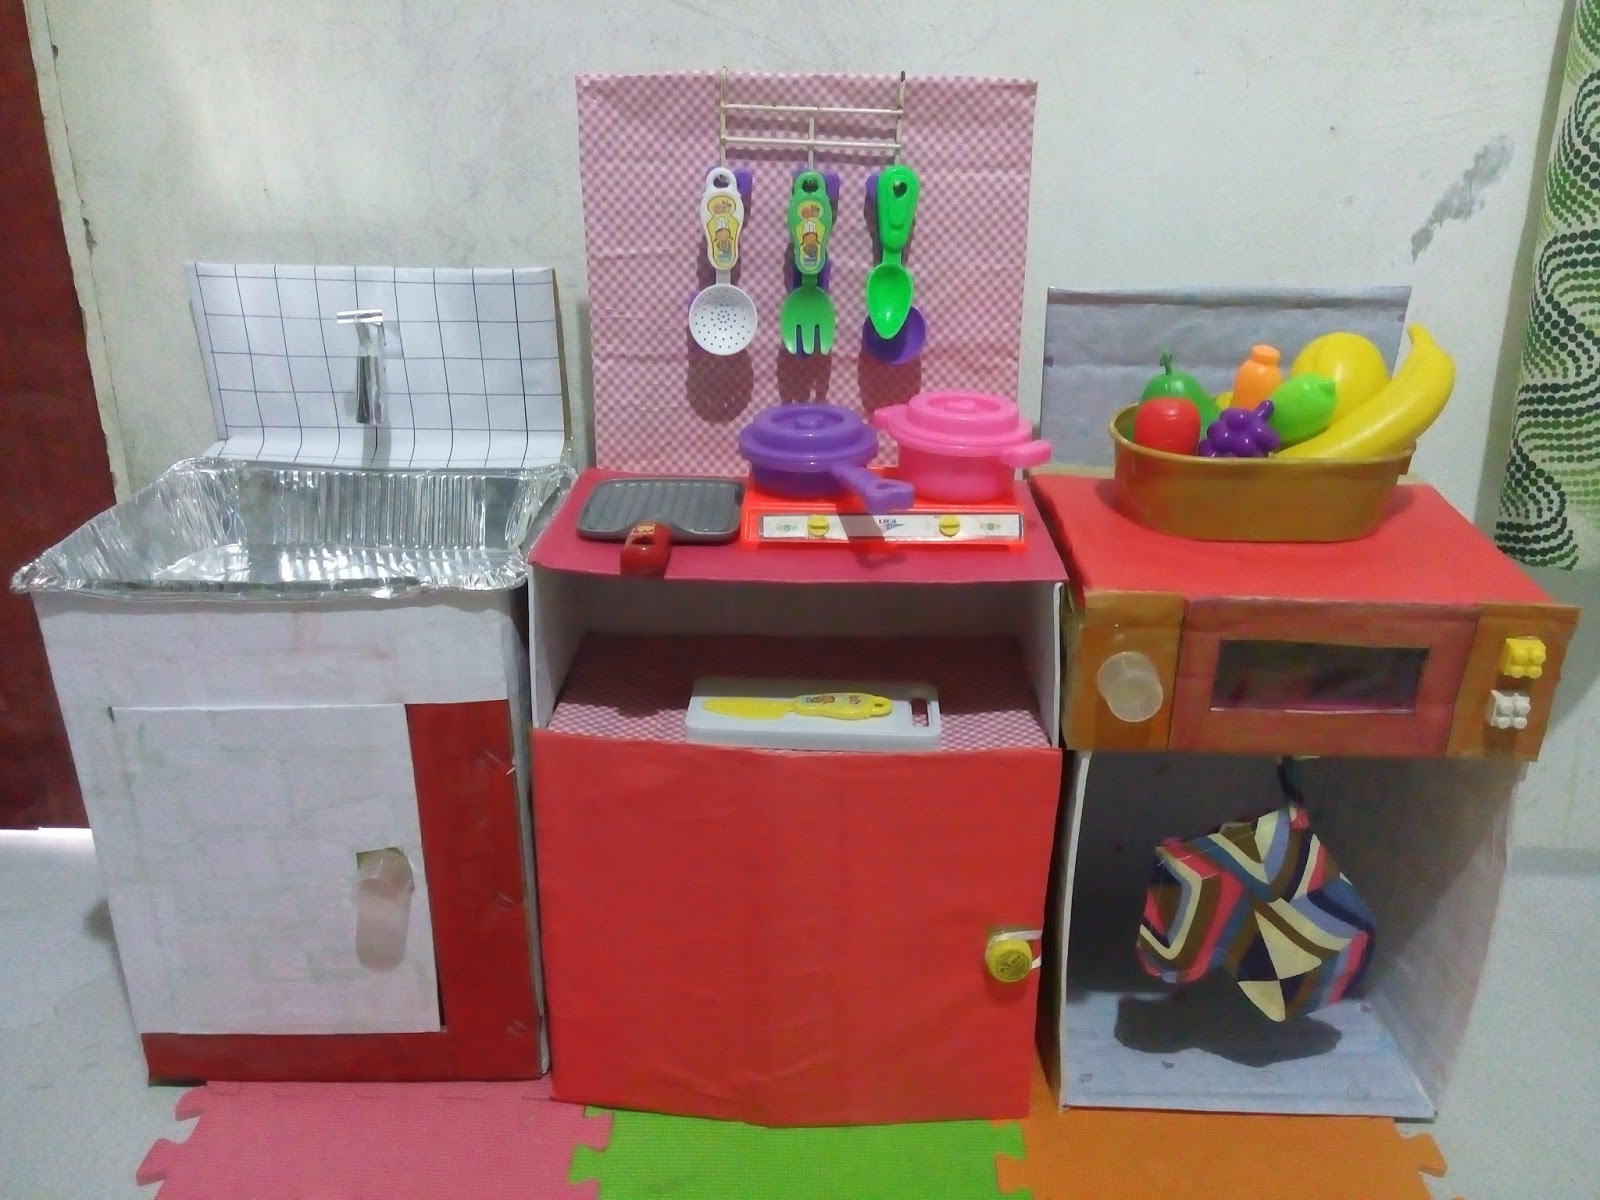 mom's reverie: DIY: Kitchen Playset From Used Boxes